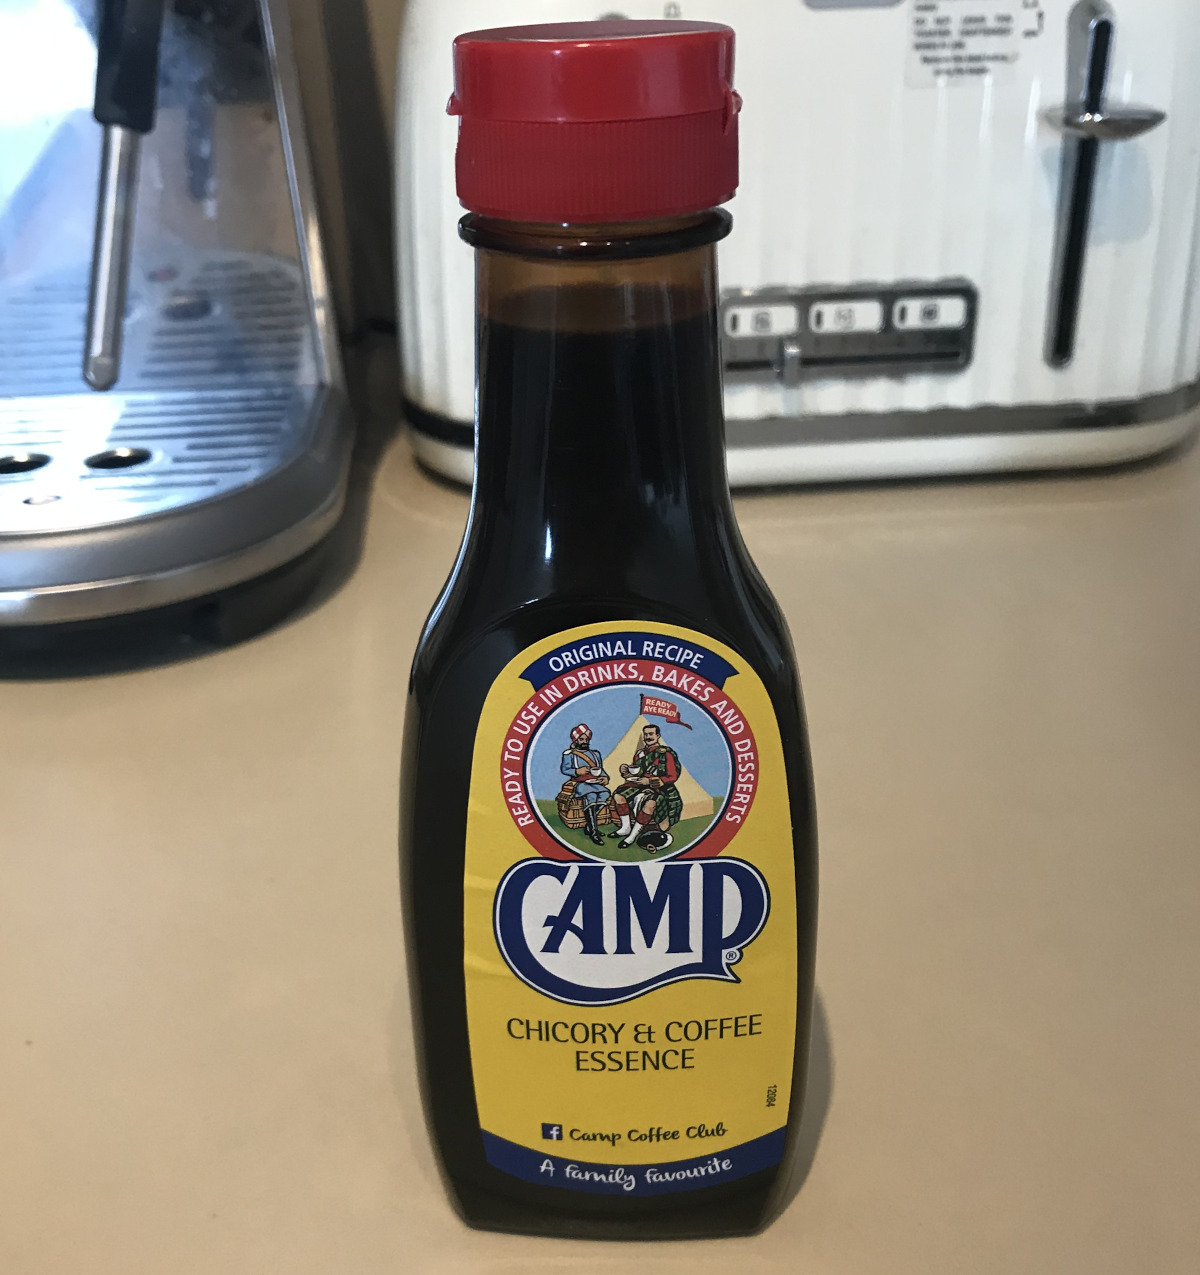 Bottle of Camp Coffee Chicory Essence